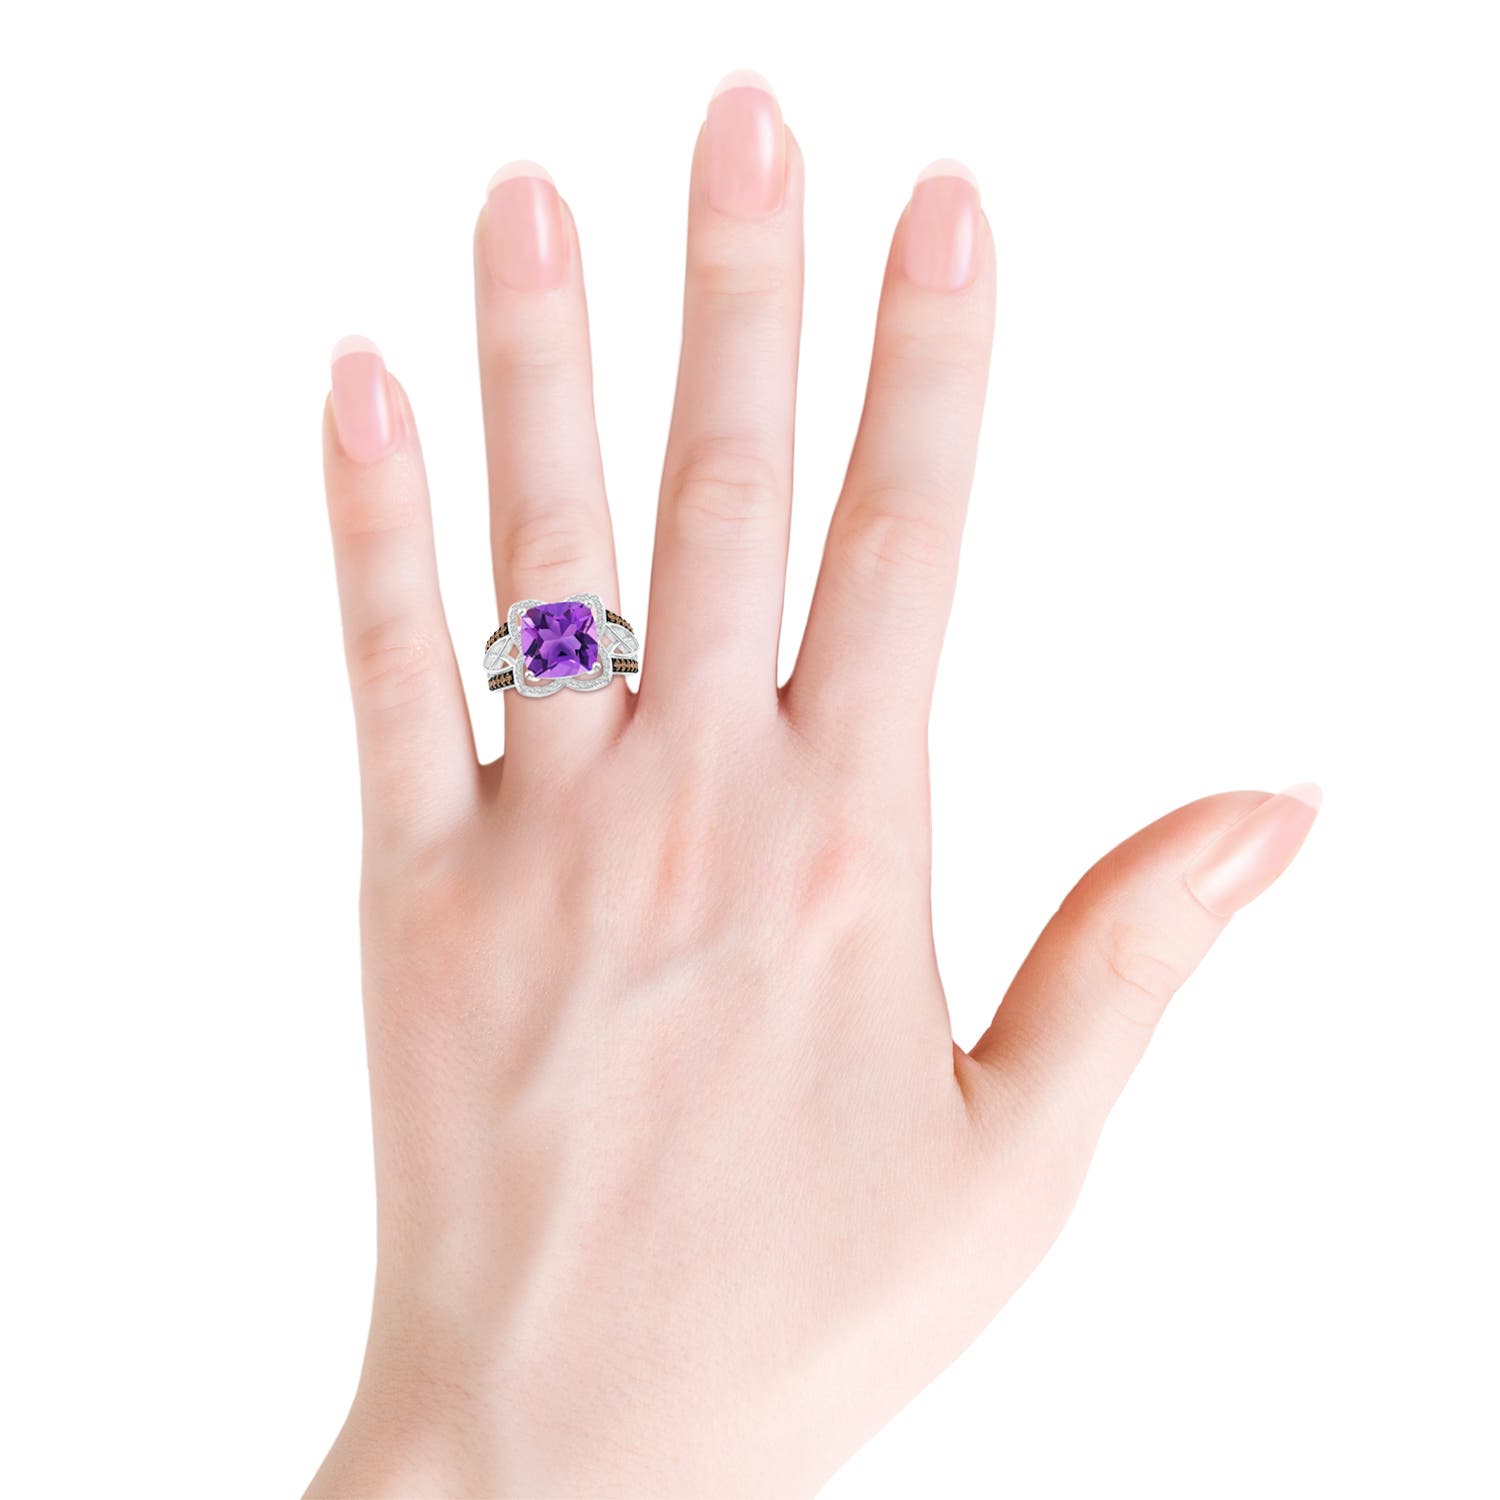 AAA - Amethyst / 4.41 CT / 14 KT White Gold